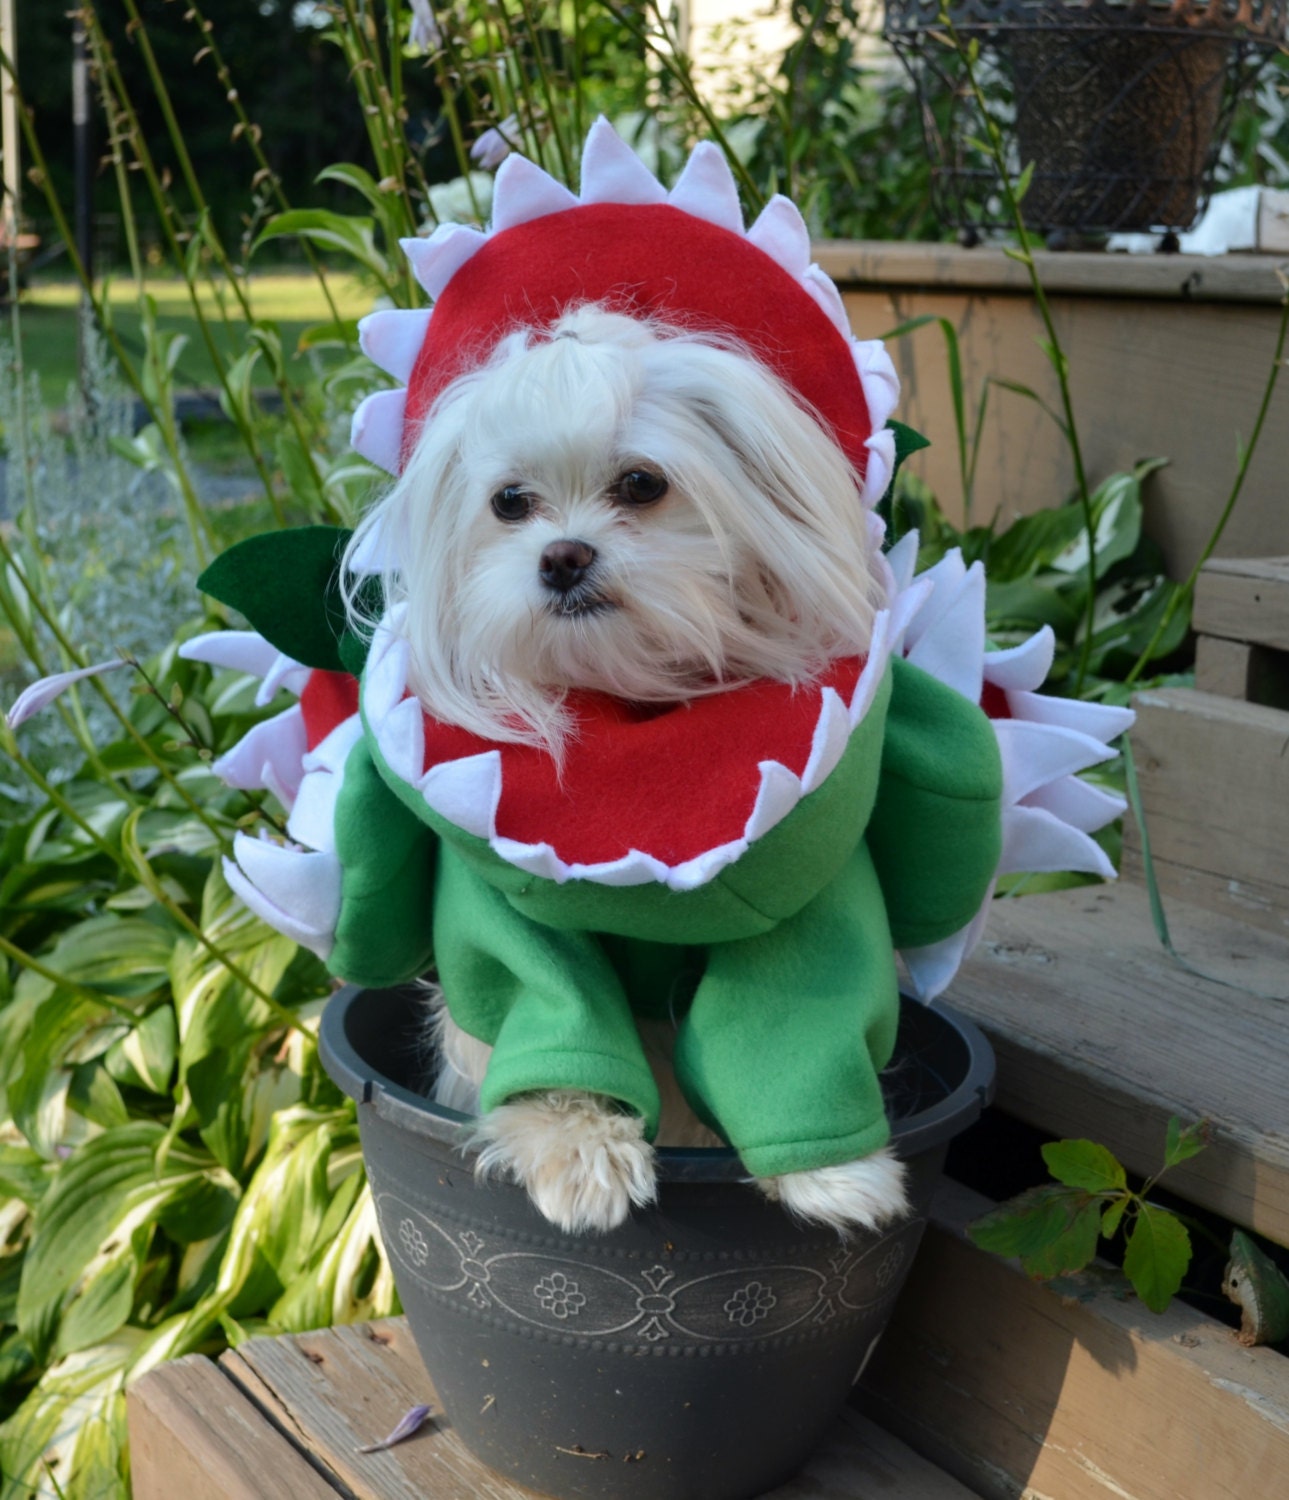 Custom made Venus Fly Trap Dog Costume for Small Breed Dogs under 15 lbs